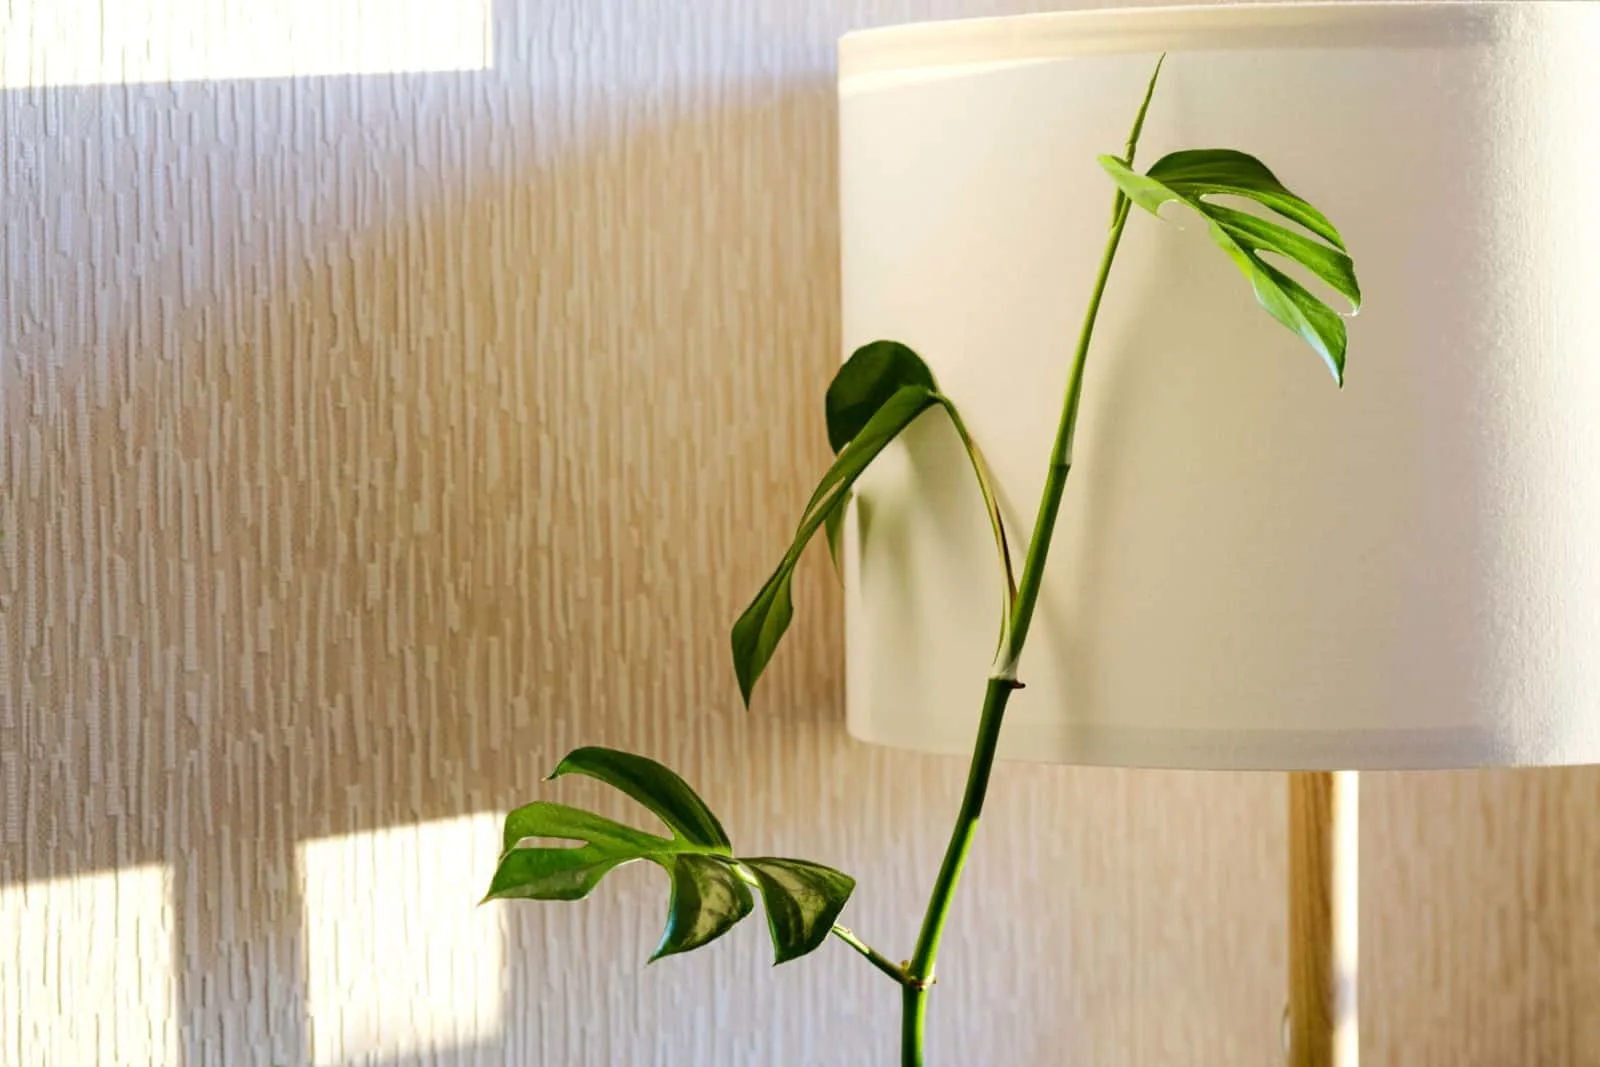 Rhaphidophora tetrasperma (Monstera Minima) stands stands next to a floor lamp in the living room